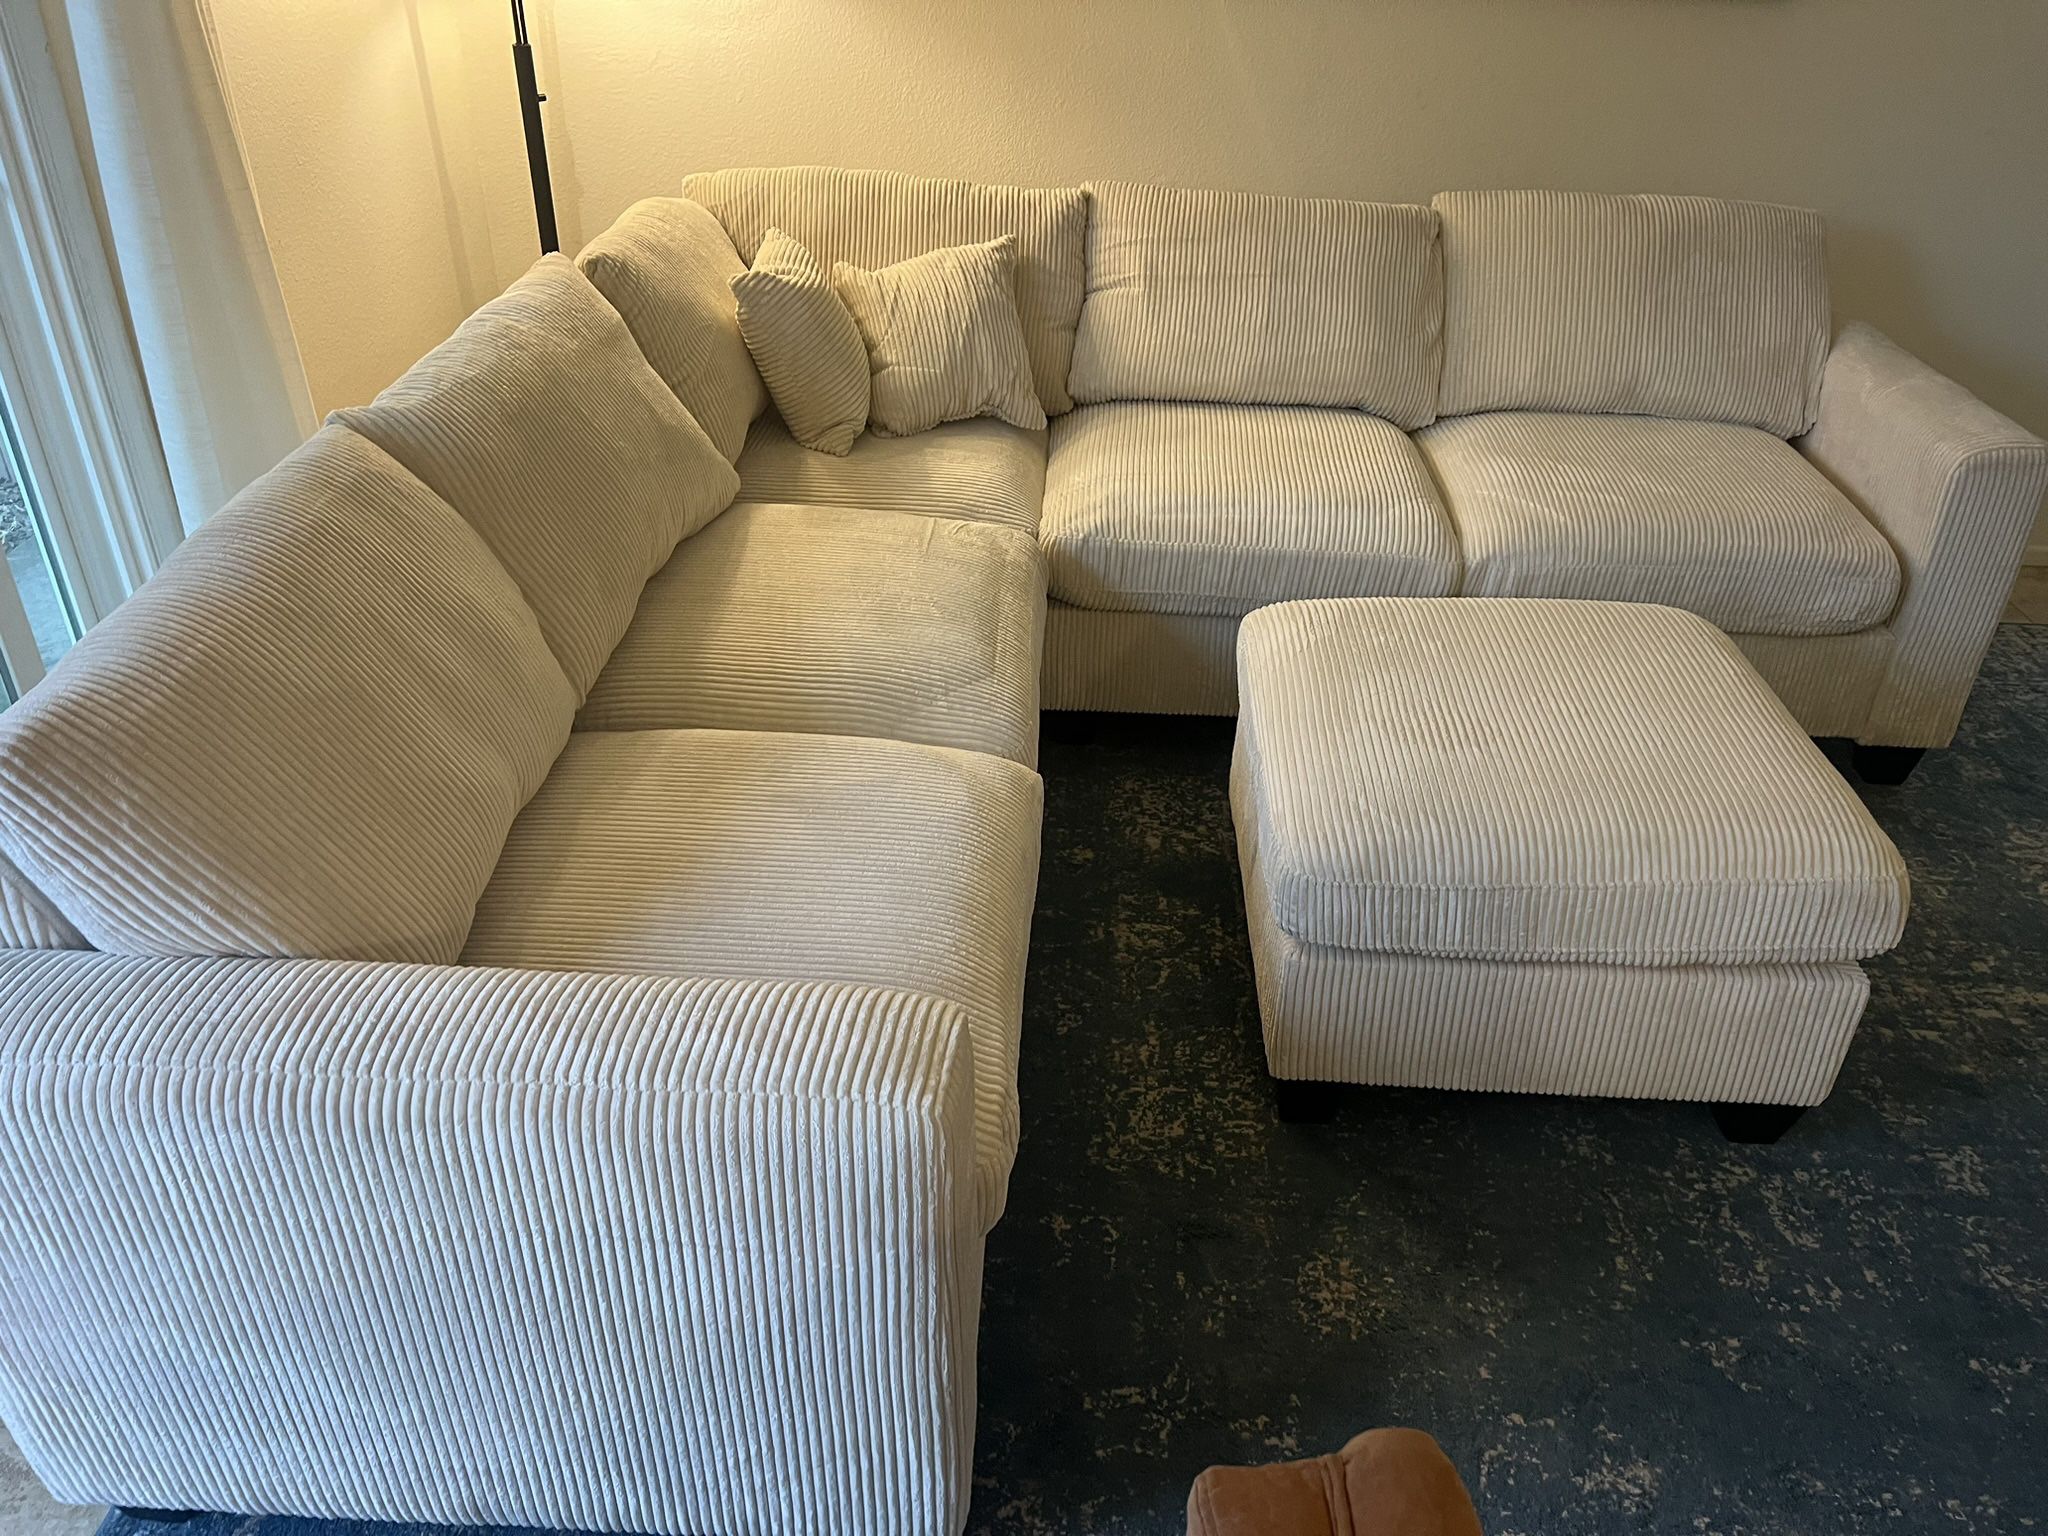 New 99x99 Corduroy Sectional Couch / Free Delivery 